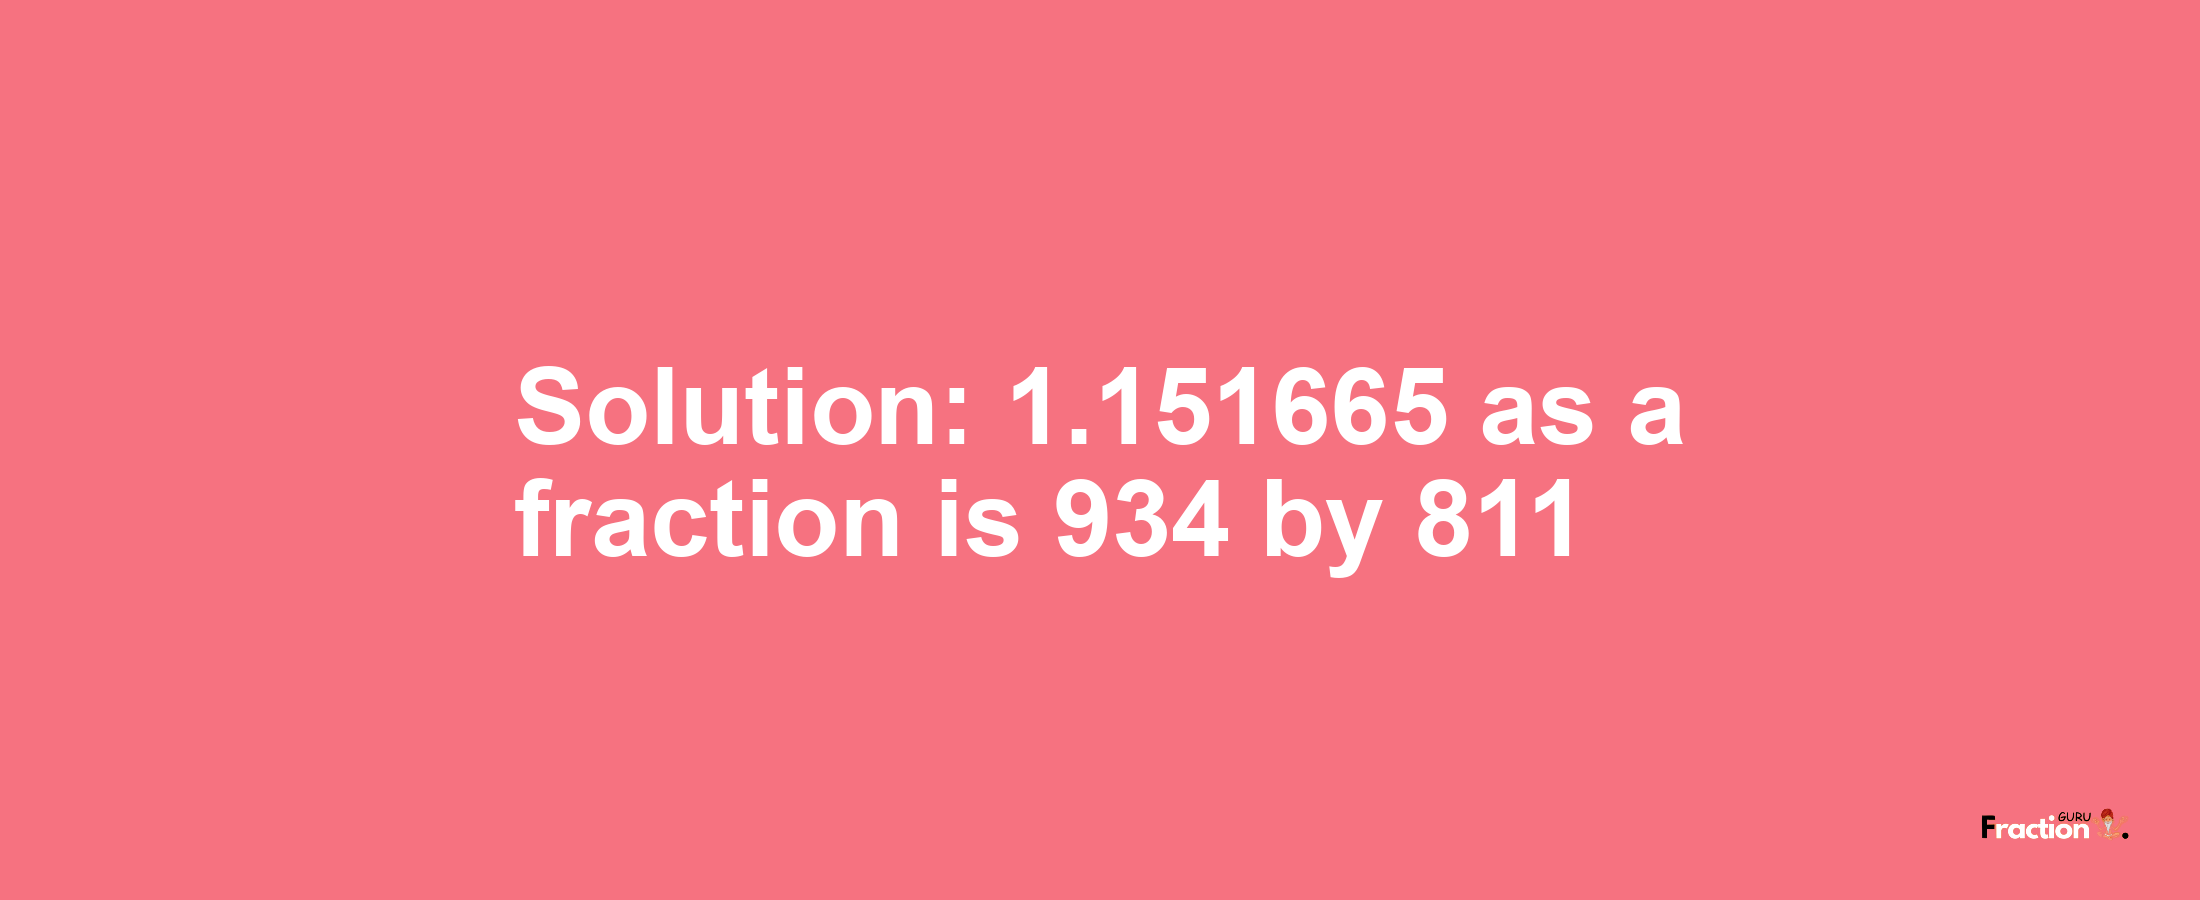 Solution:1.151665 as a fraction is 934/811